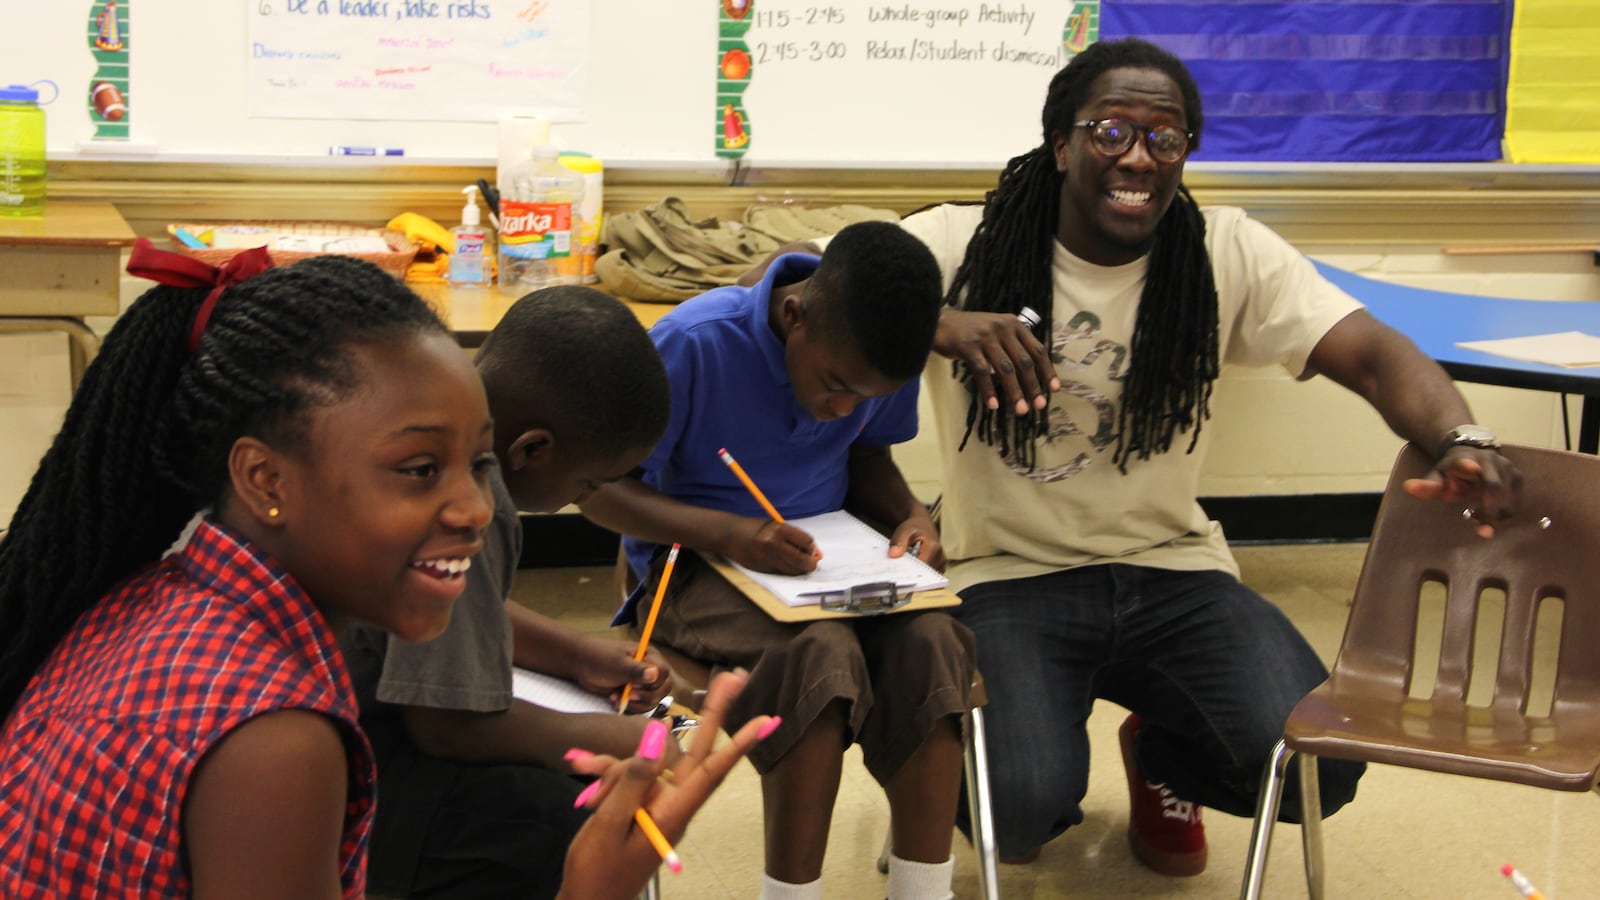 Freedom School teacher Lozie Guy (right) walks his class through an exercise where they build their own family trees during the summer learning program at Frayser Achievement Elementary School in Memphis.